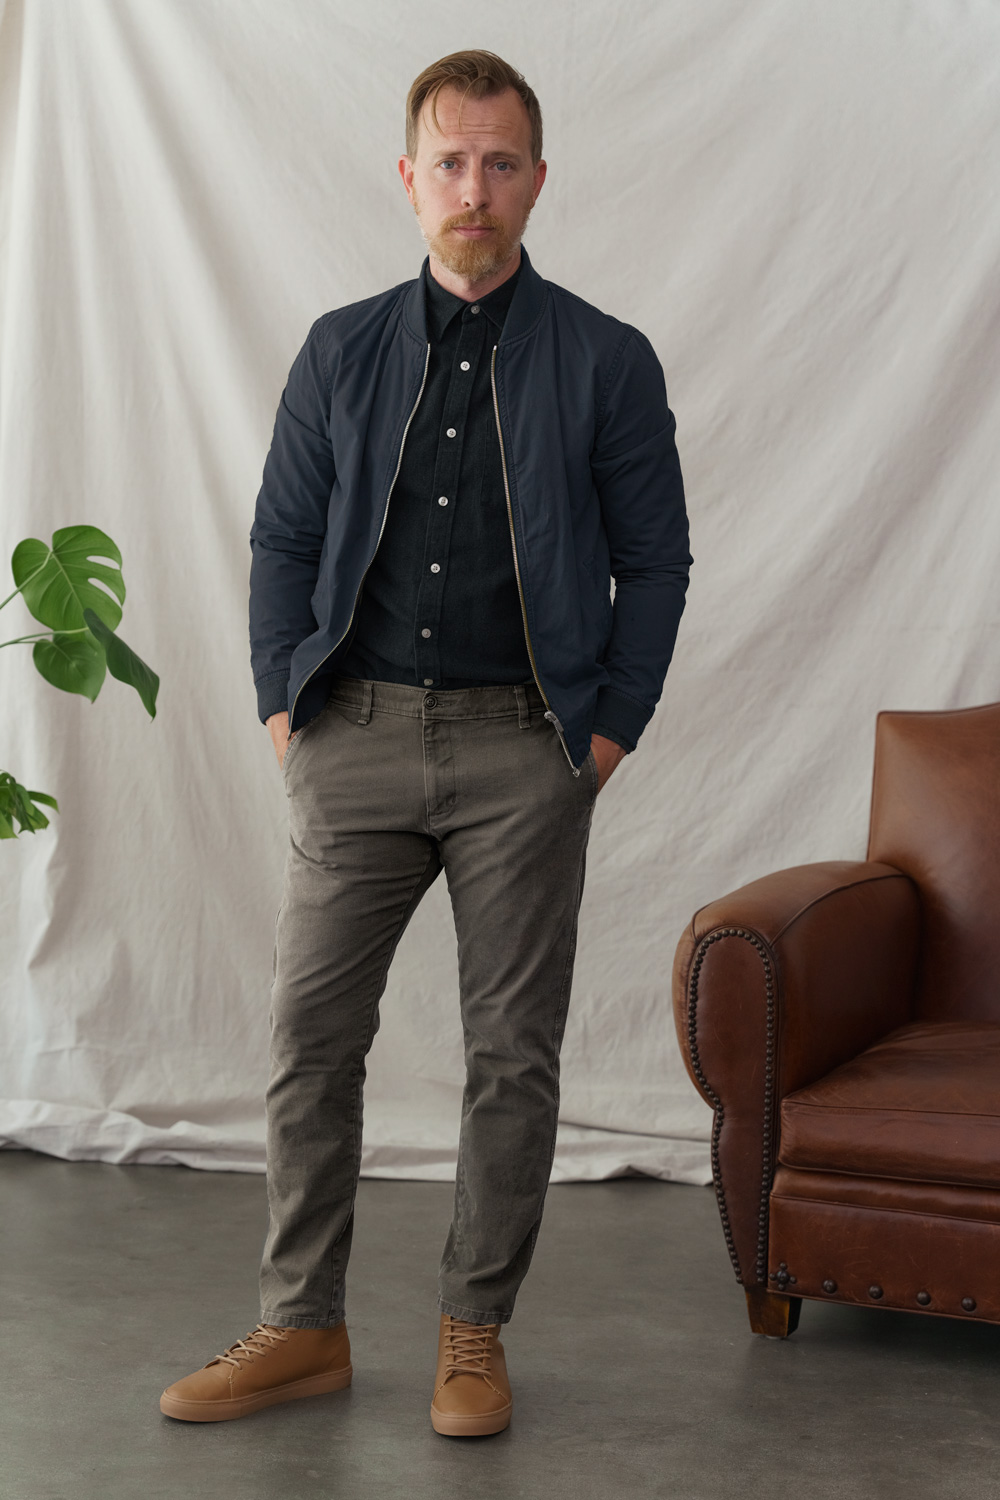 man wearing a bomber jacket with button down shirt, pants, and leather sneakers